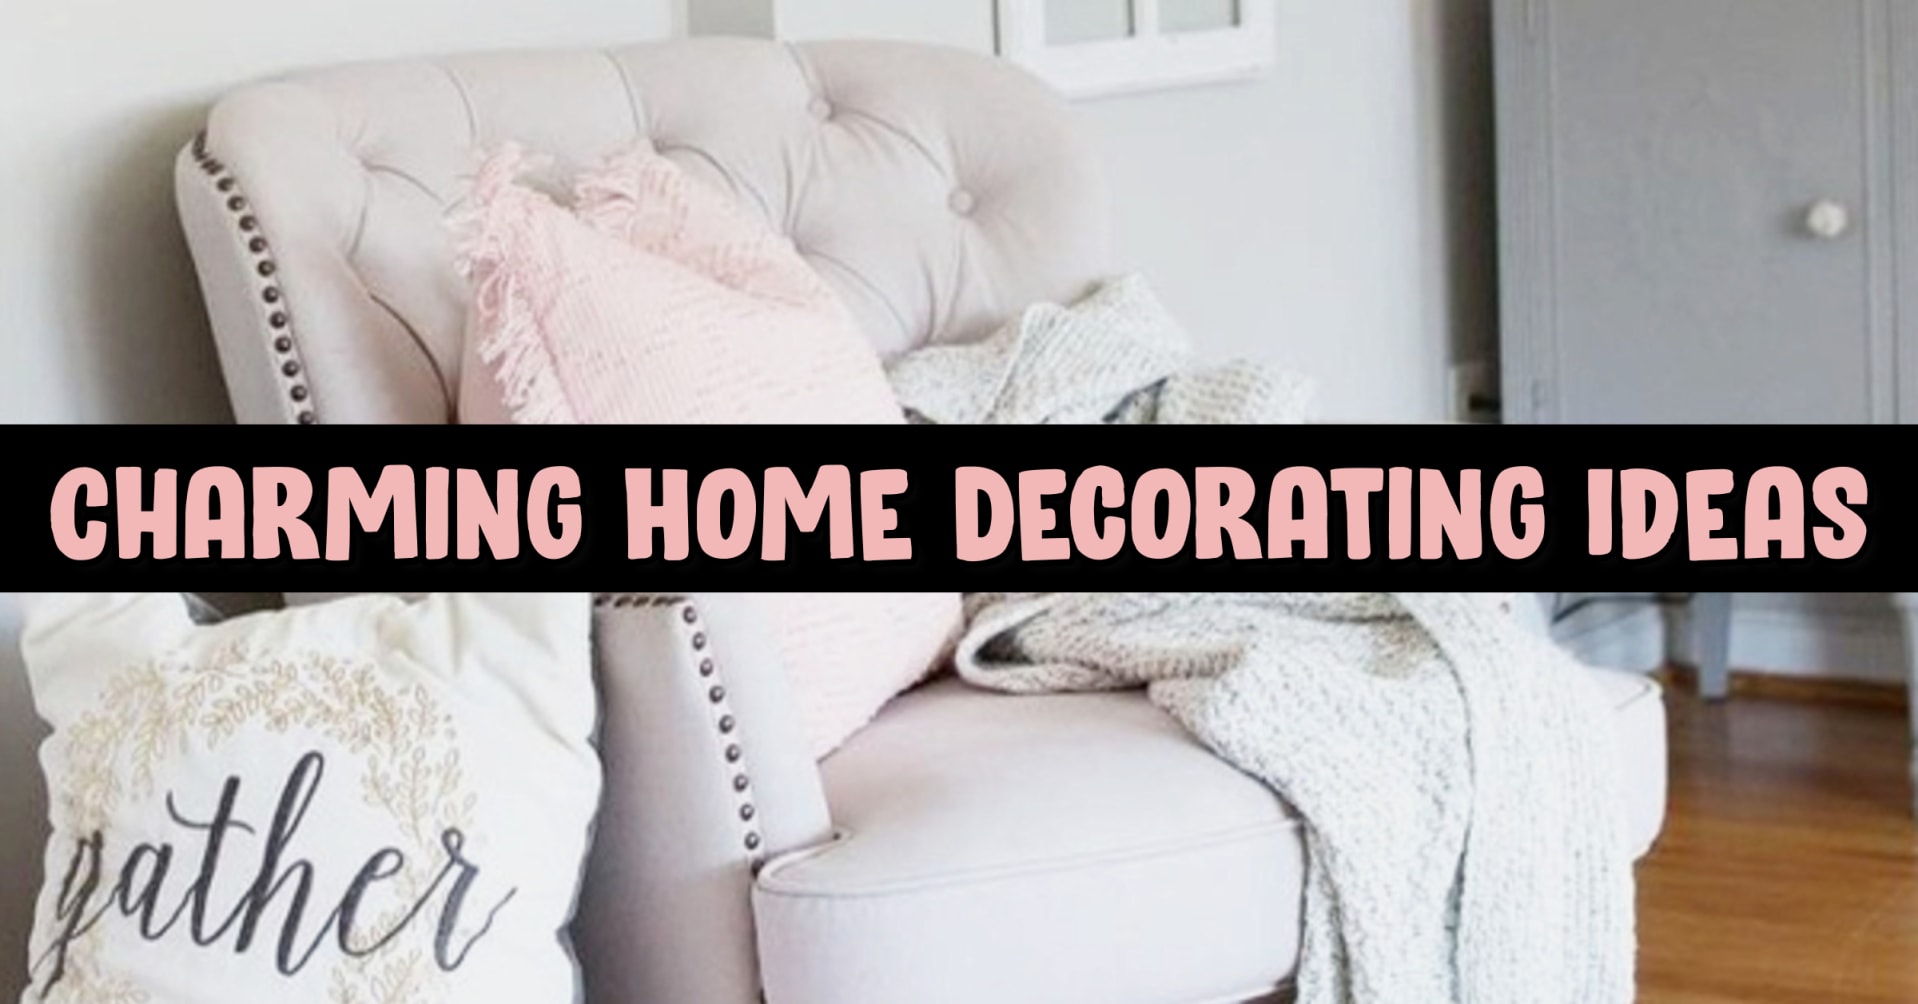 Home Decor on a Budget - Charming house decorating ideas for home decorating on a budget - best charming home decor ideas on Pinterest including french country decorating, charming and sophisticated living rooms (and gorgeous elegant small living room ideas in farmhouse cottage decor style and traditional country decor) - romantic decorating ideas with charming house decoration items for your small cozy home or apartment